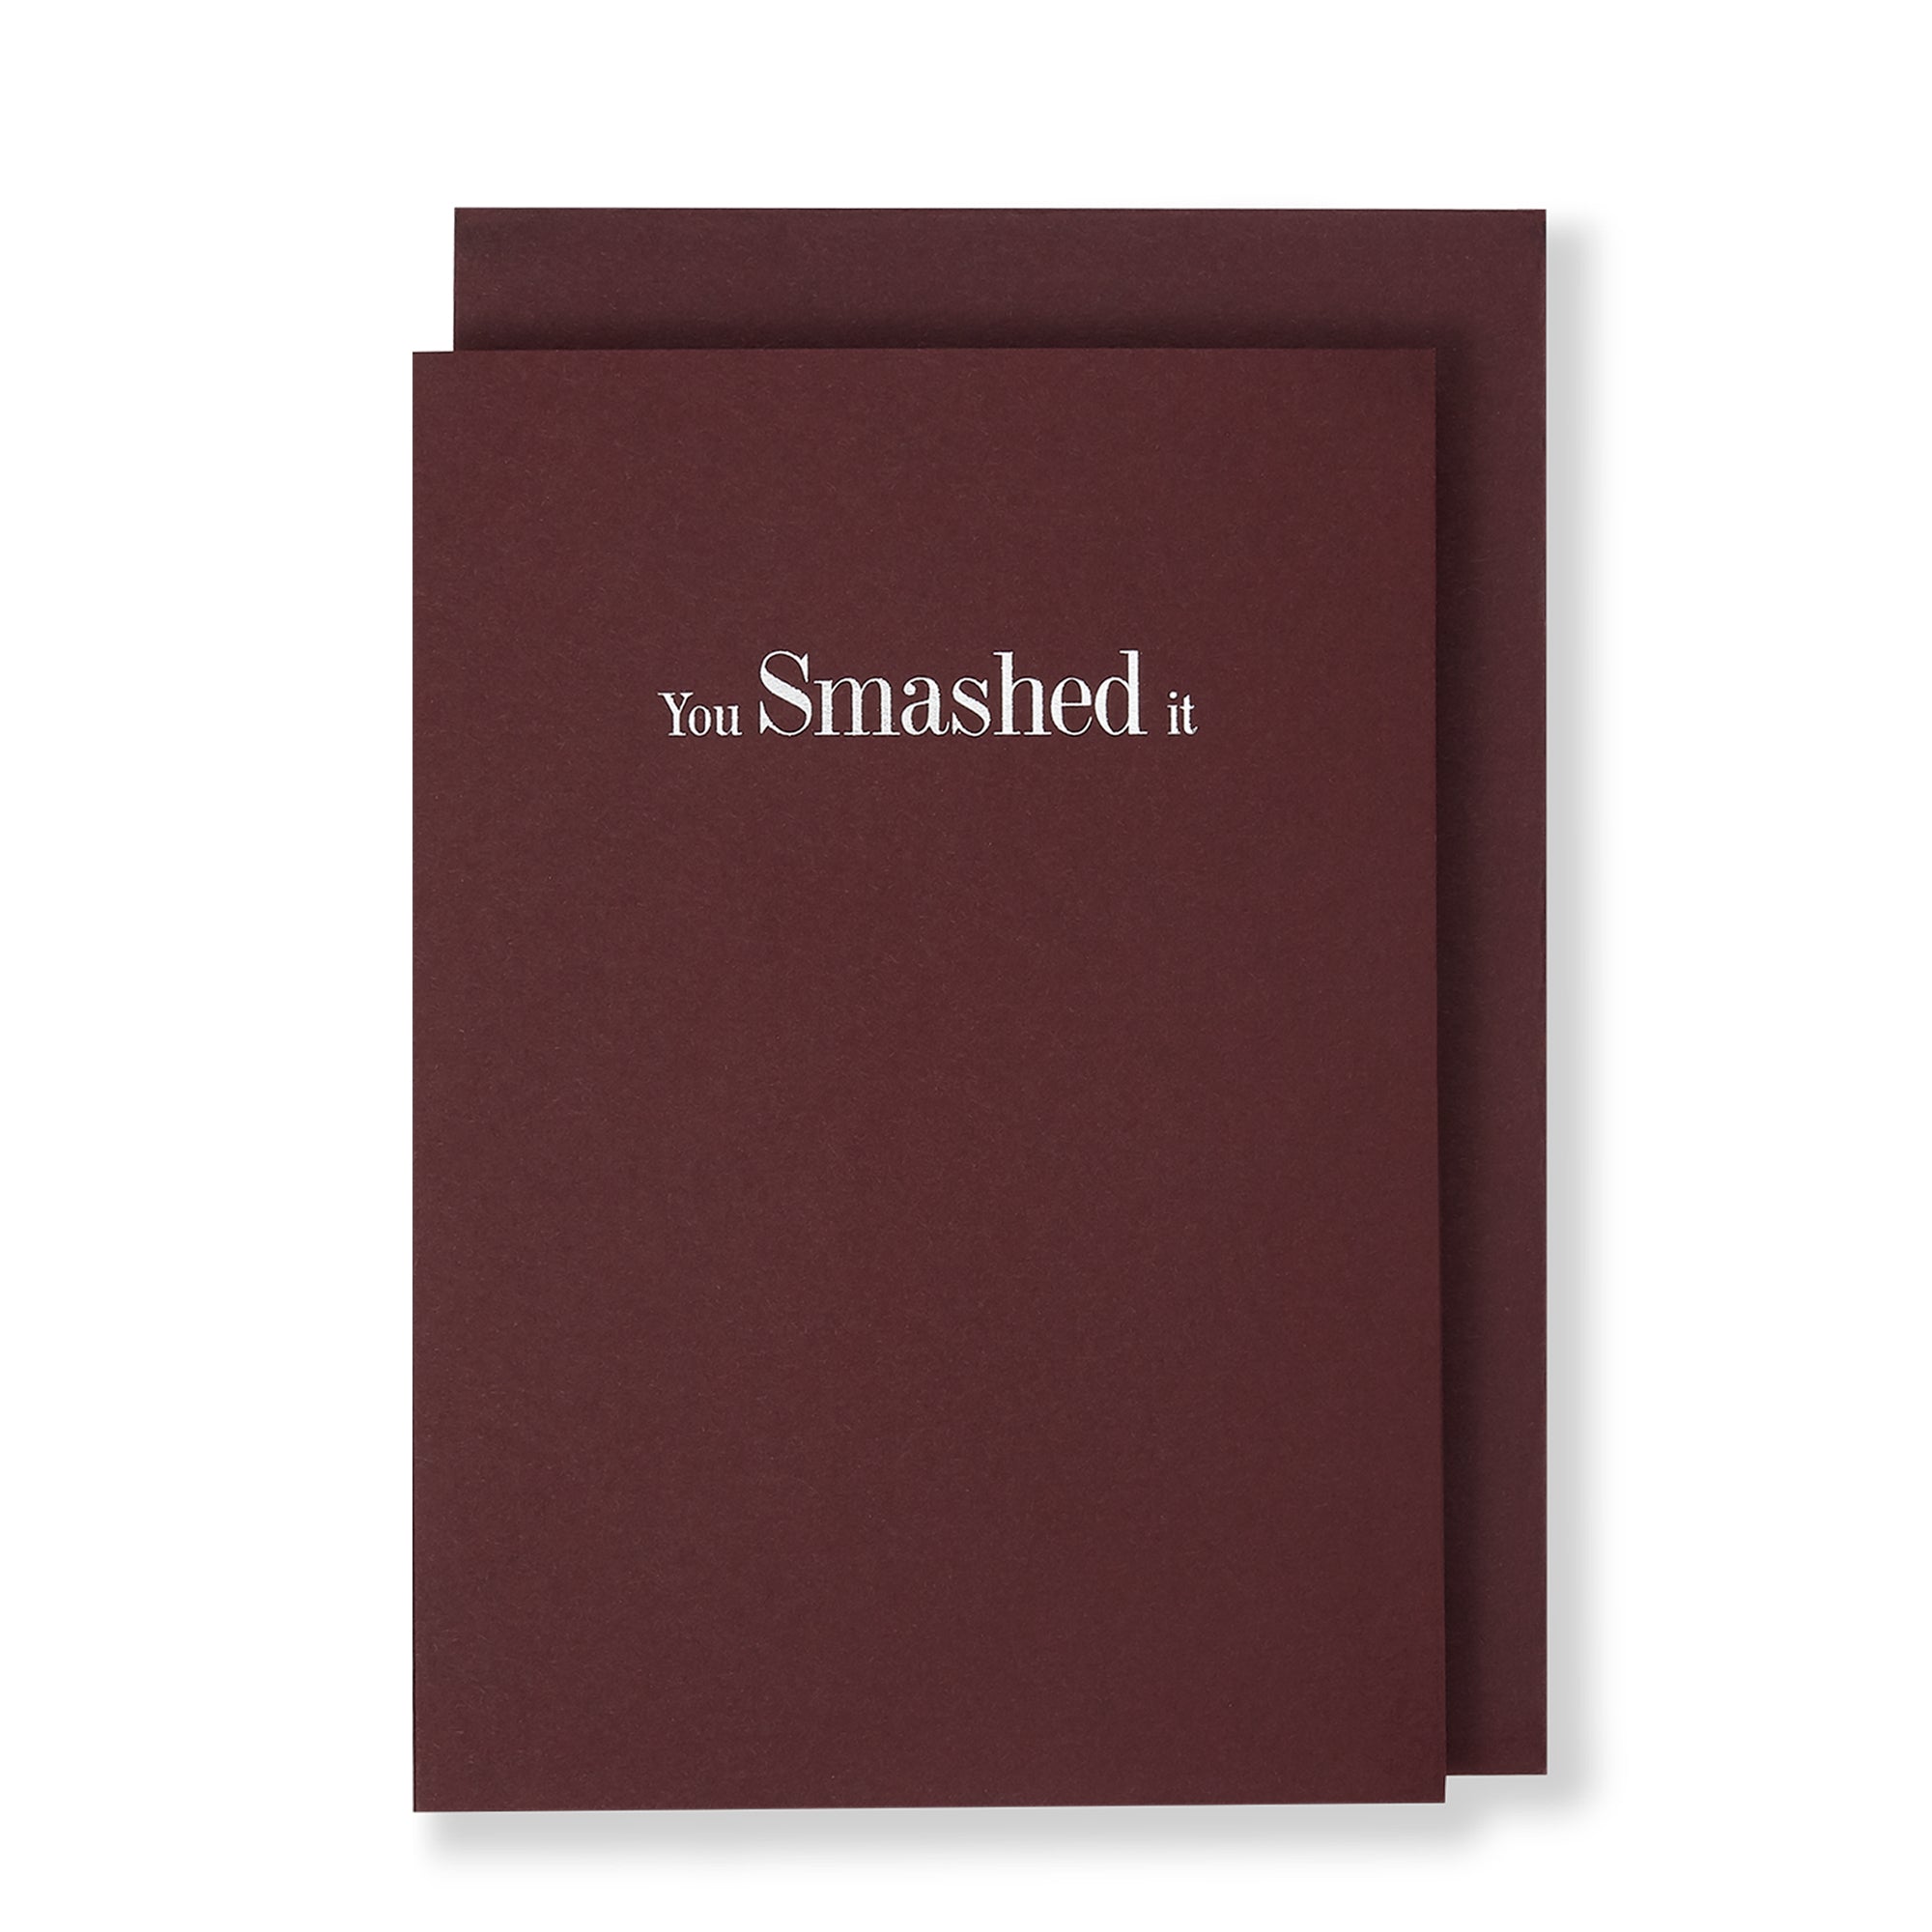 You Smashed It Greeting Card in Burgundy, Front